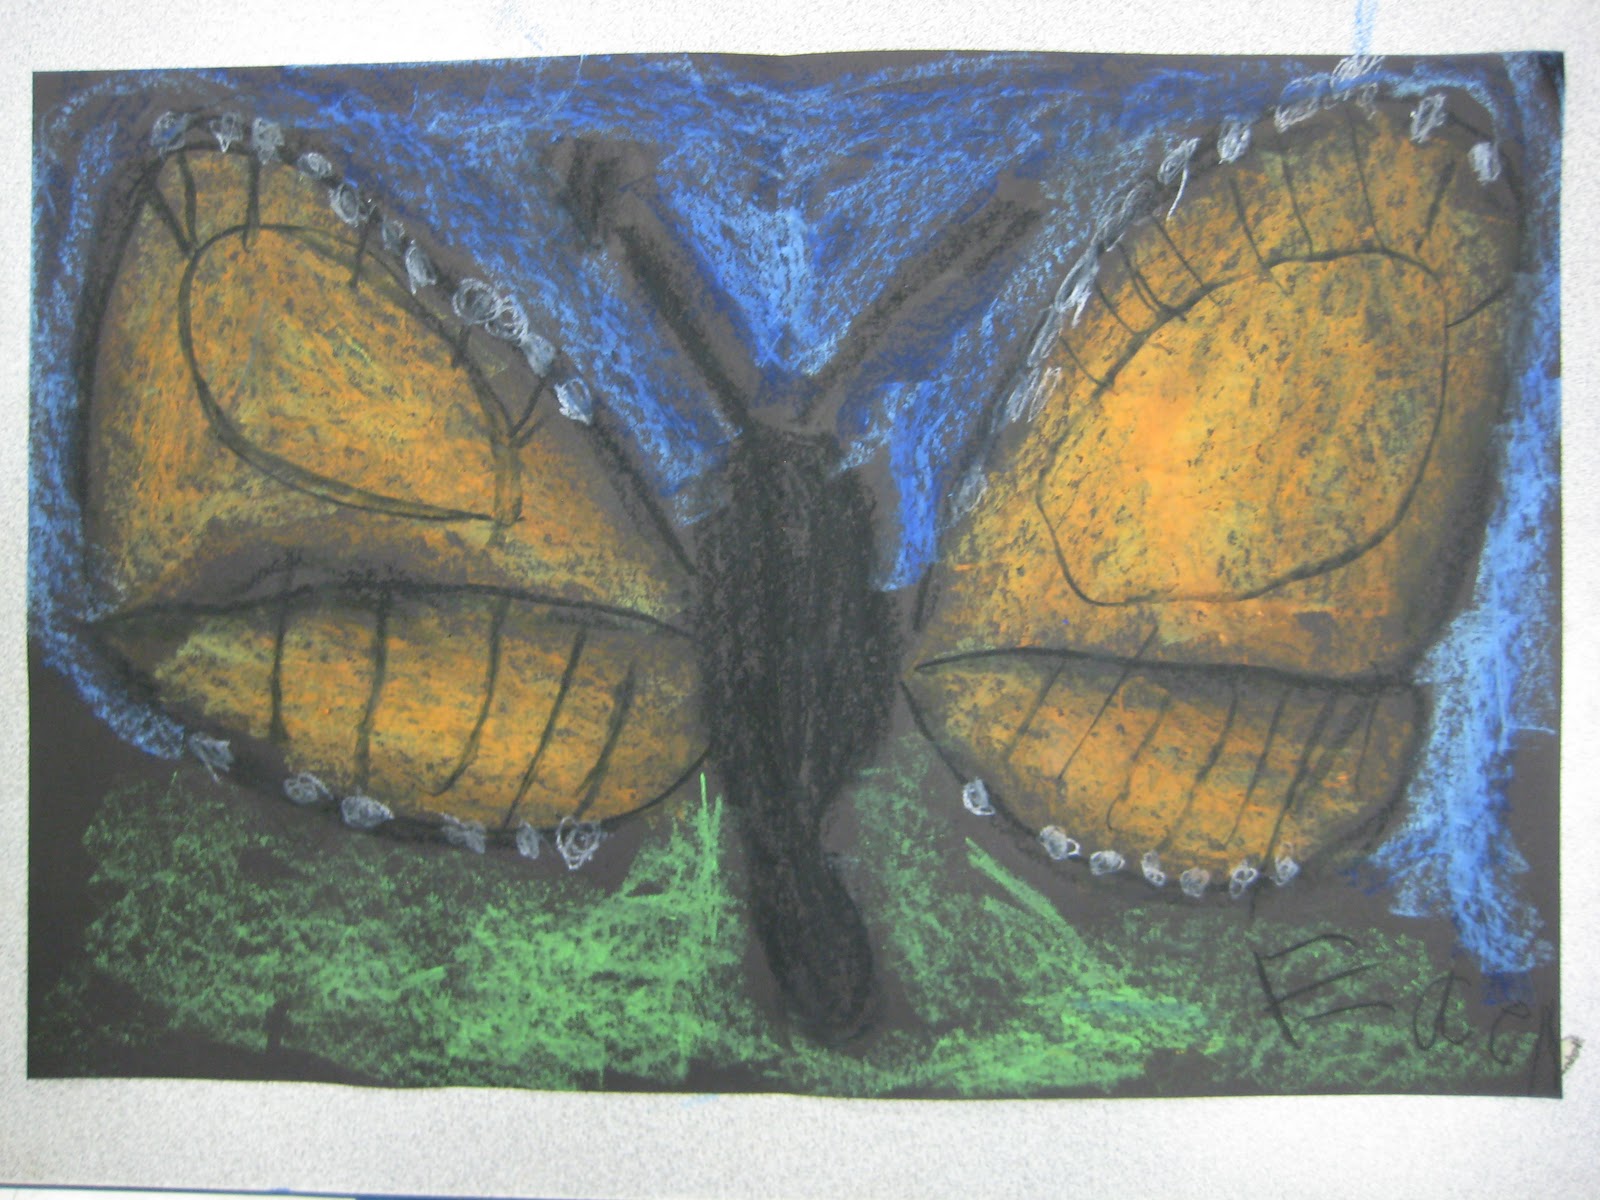 Art for Kids and Beginners: Create a Monarch Butterfly with Oil Pastels, Em Winn